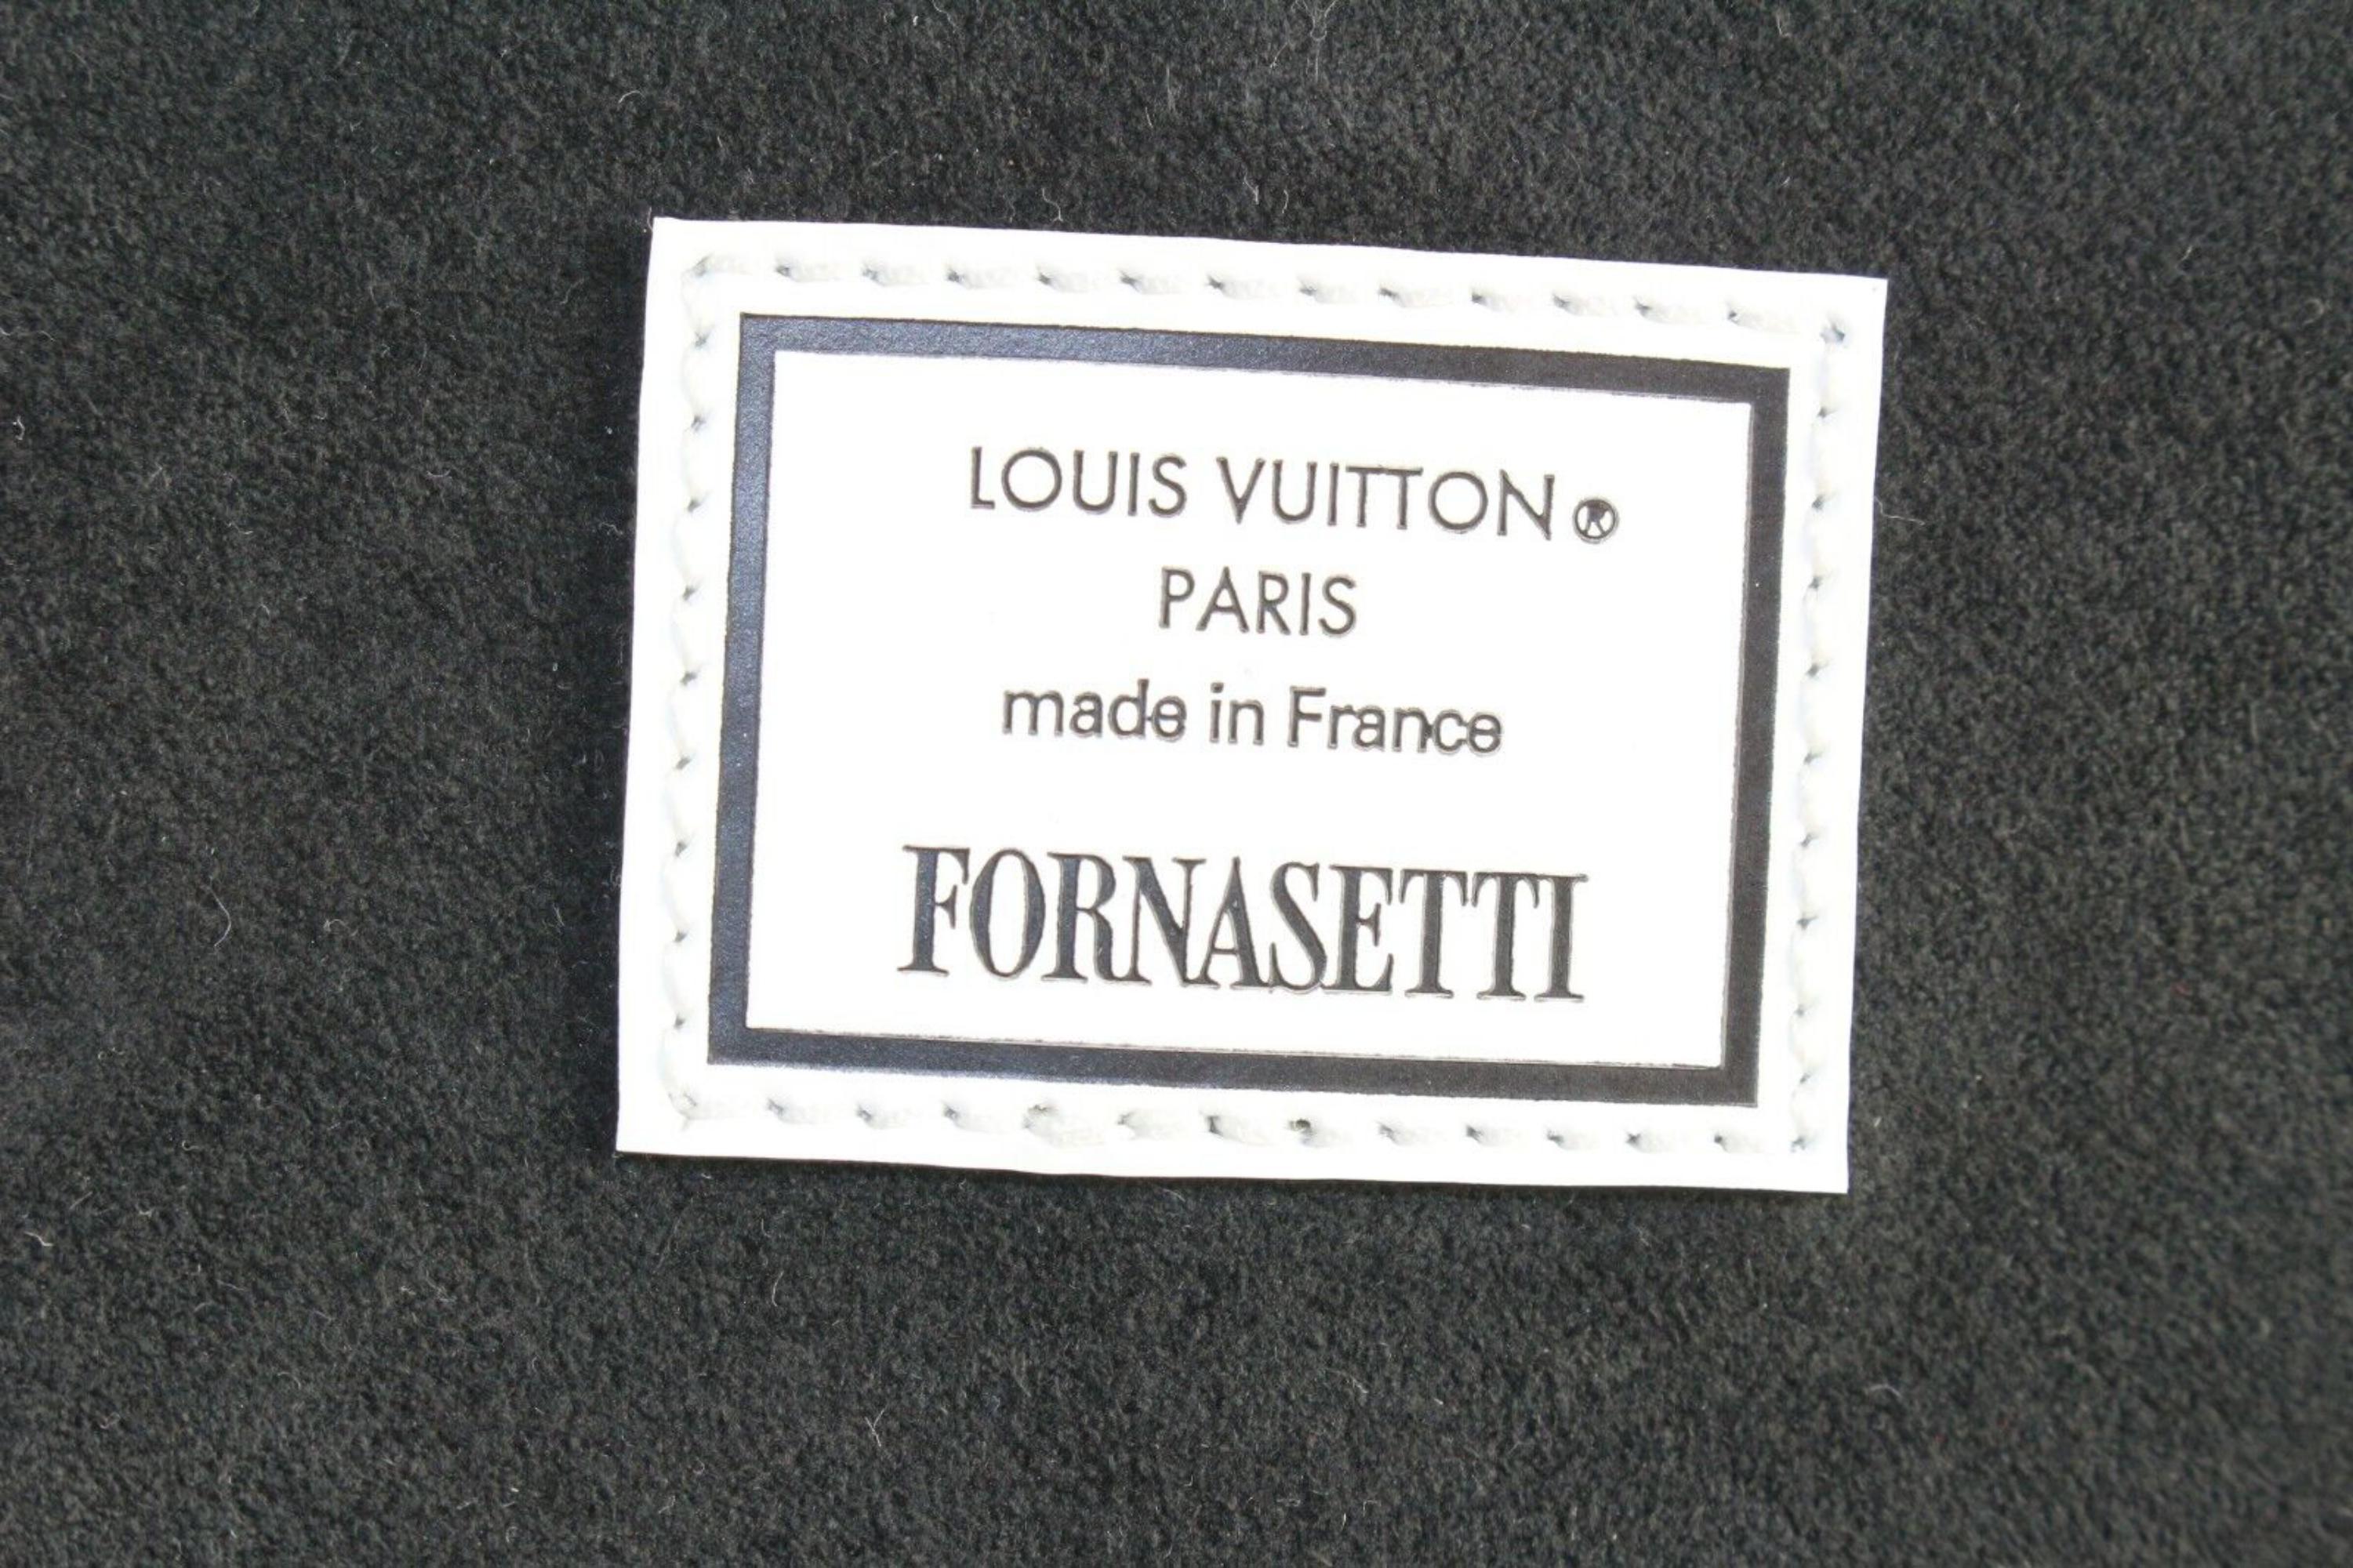 Louis Vuitton Monogram Foransetti Pencil Pouch Art Set Case Clutch 7LU0224 In New Condition For Sale In Dix hills, NY